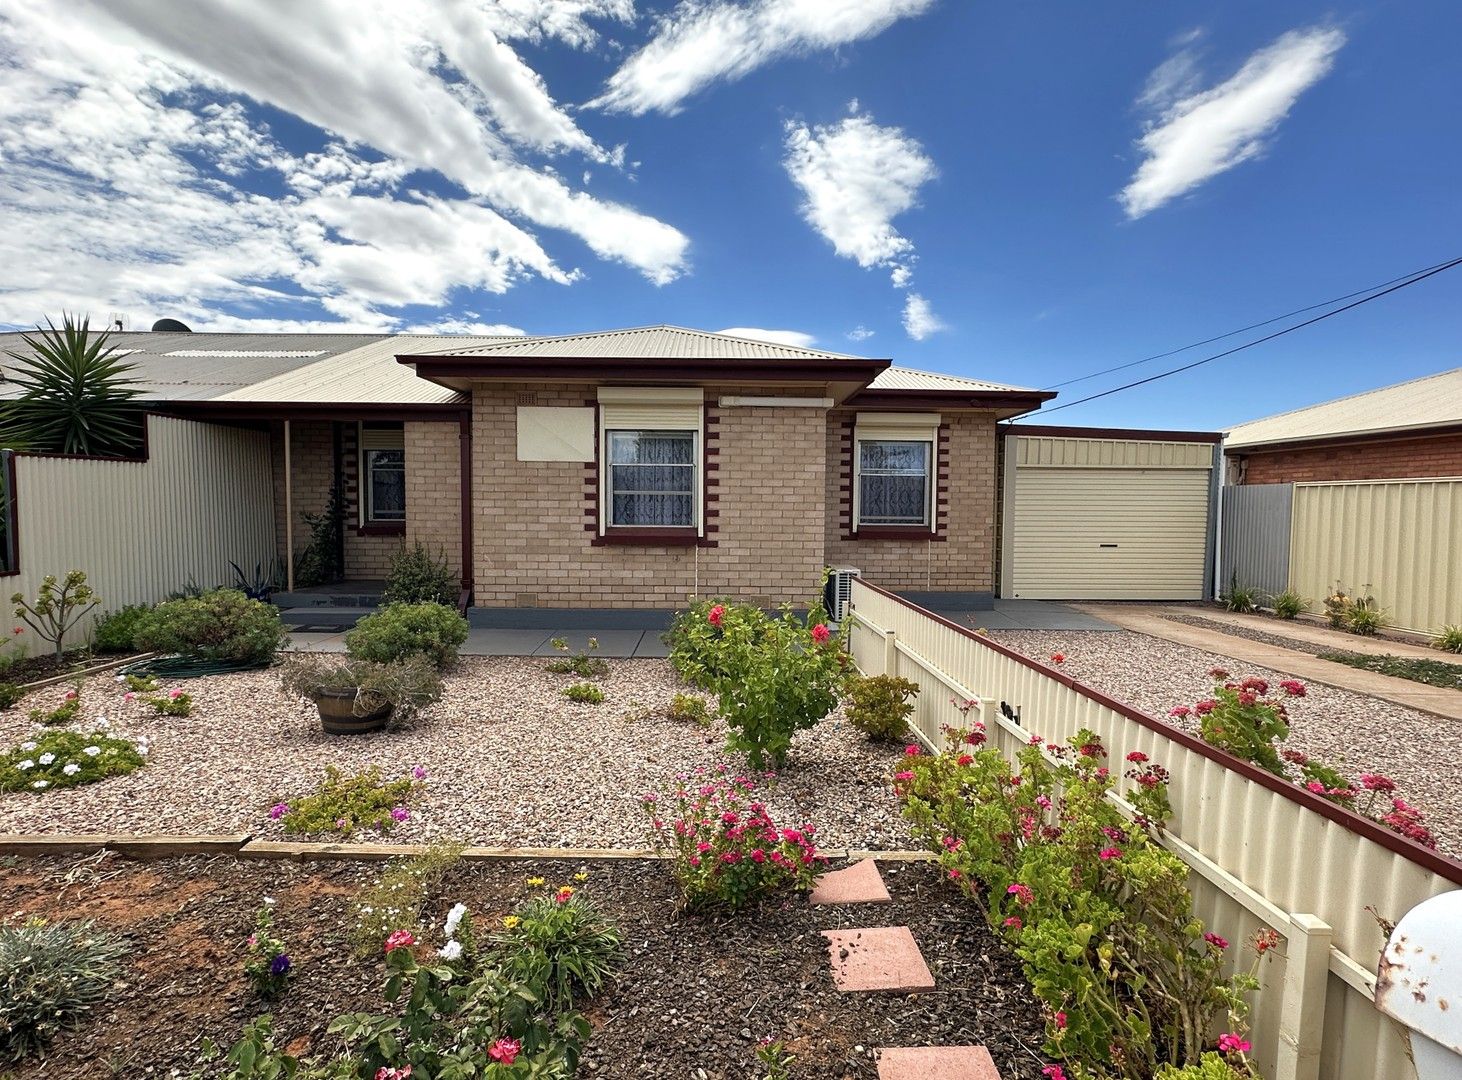 3 bedrooms Semi-Detached in 6 Loring Street WHYALLA STUART SA, 5608